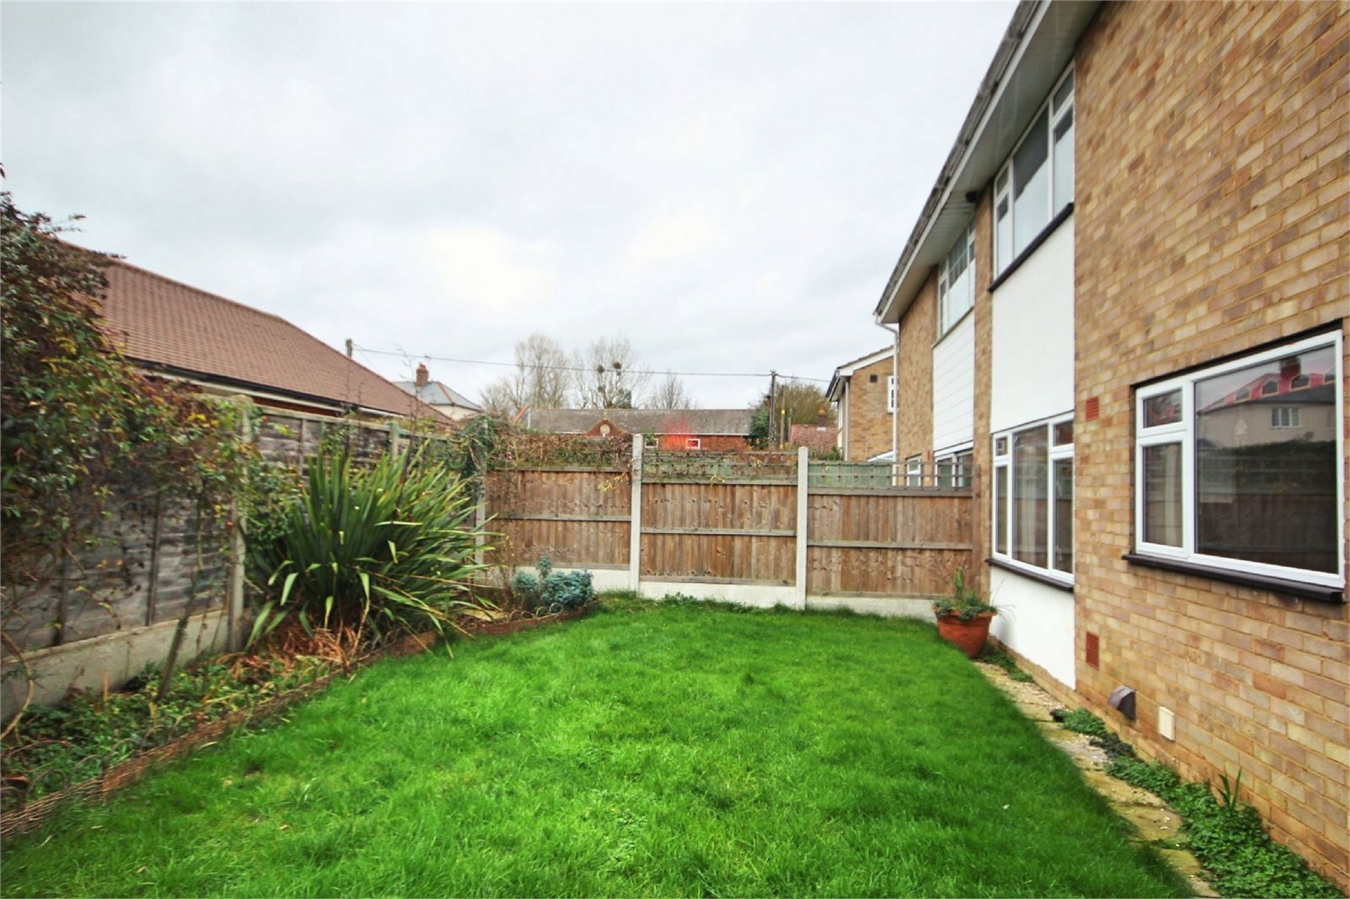 3 Bedrooms Semi-detached house for sale in Sorrell Close, Little Waltham, Chelmsford, Essex CM3